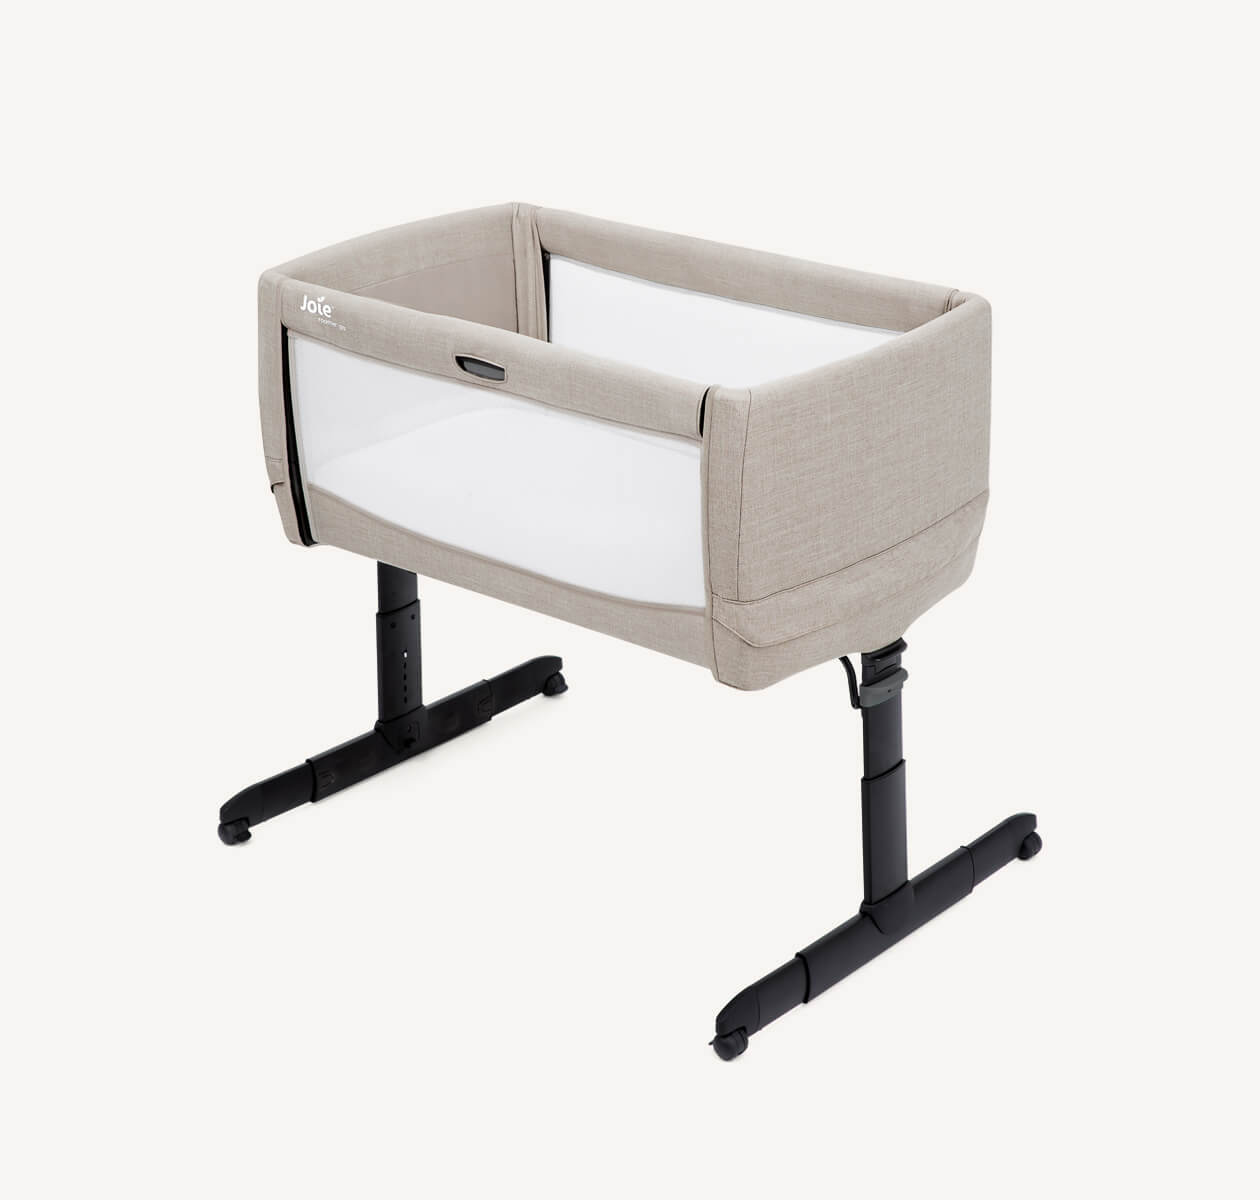   Tan Joie roomie go bedside travel crib at an angle with the drop side raised.